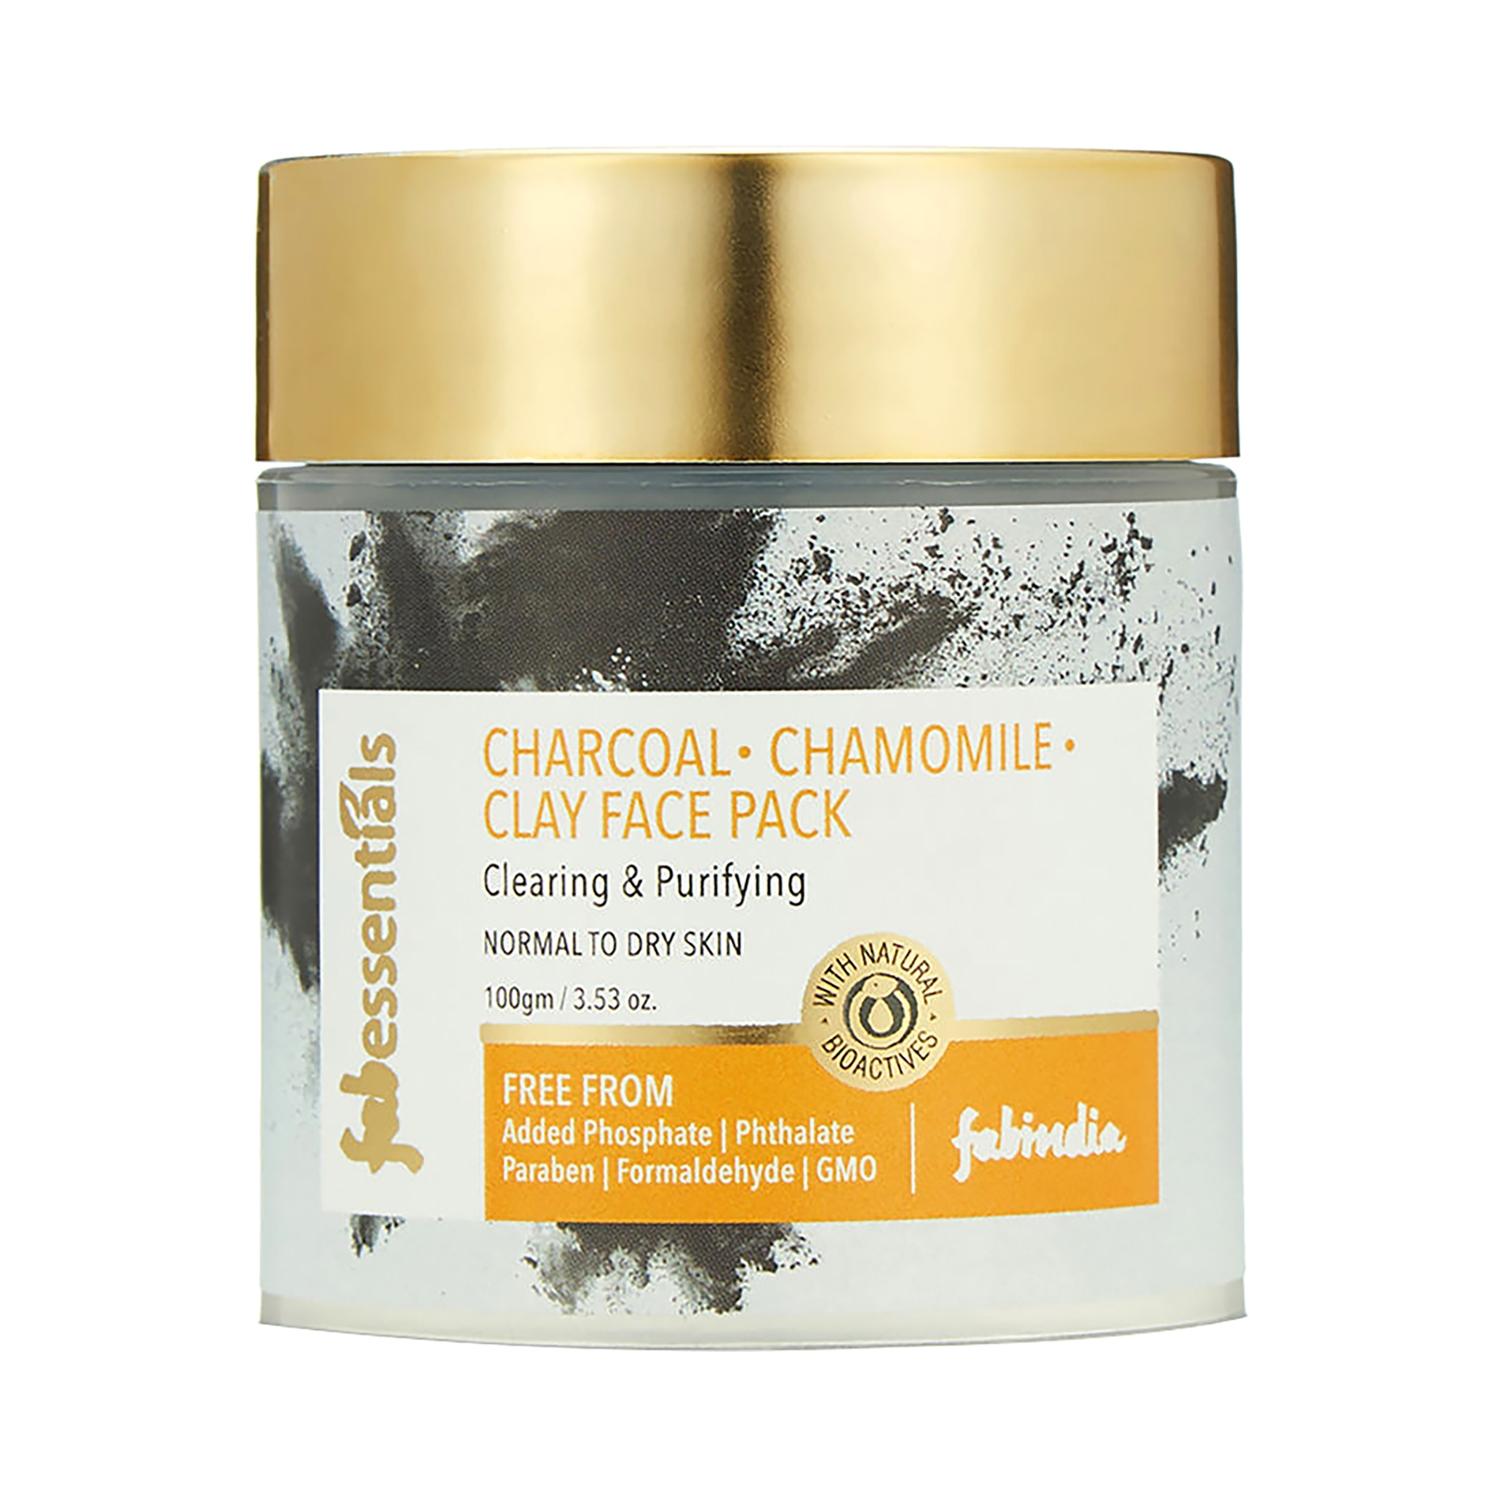 fabessentials-charcoal-chamomile-face-pack-(100g)